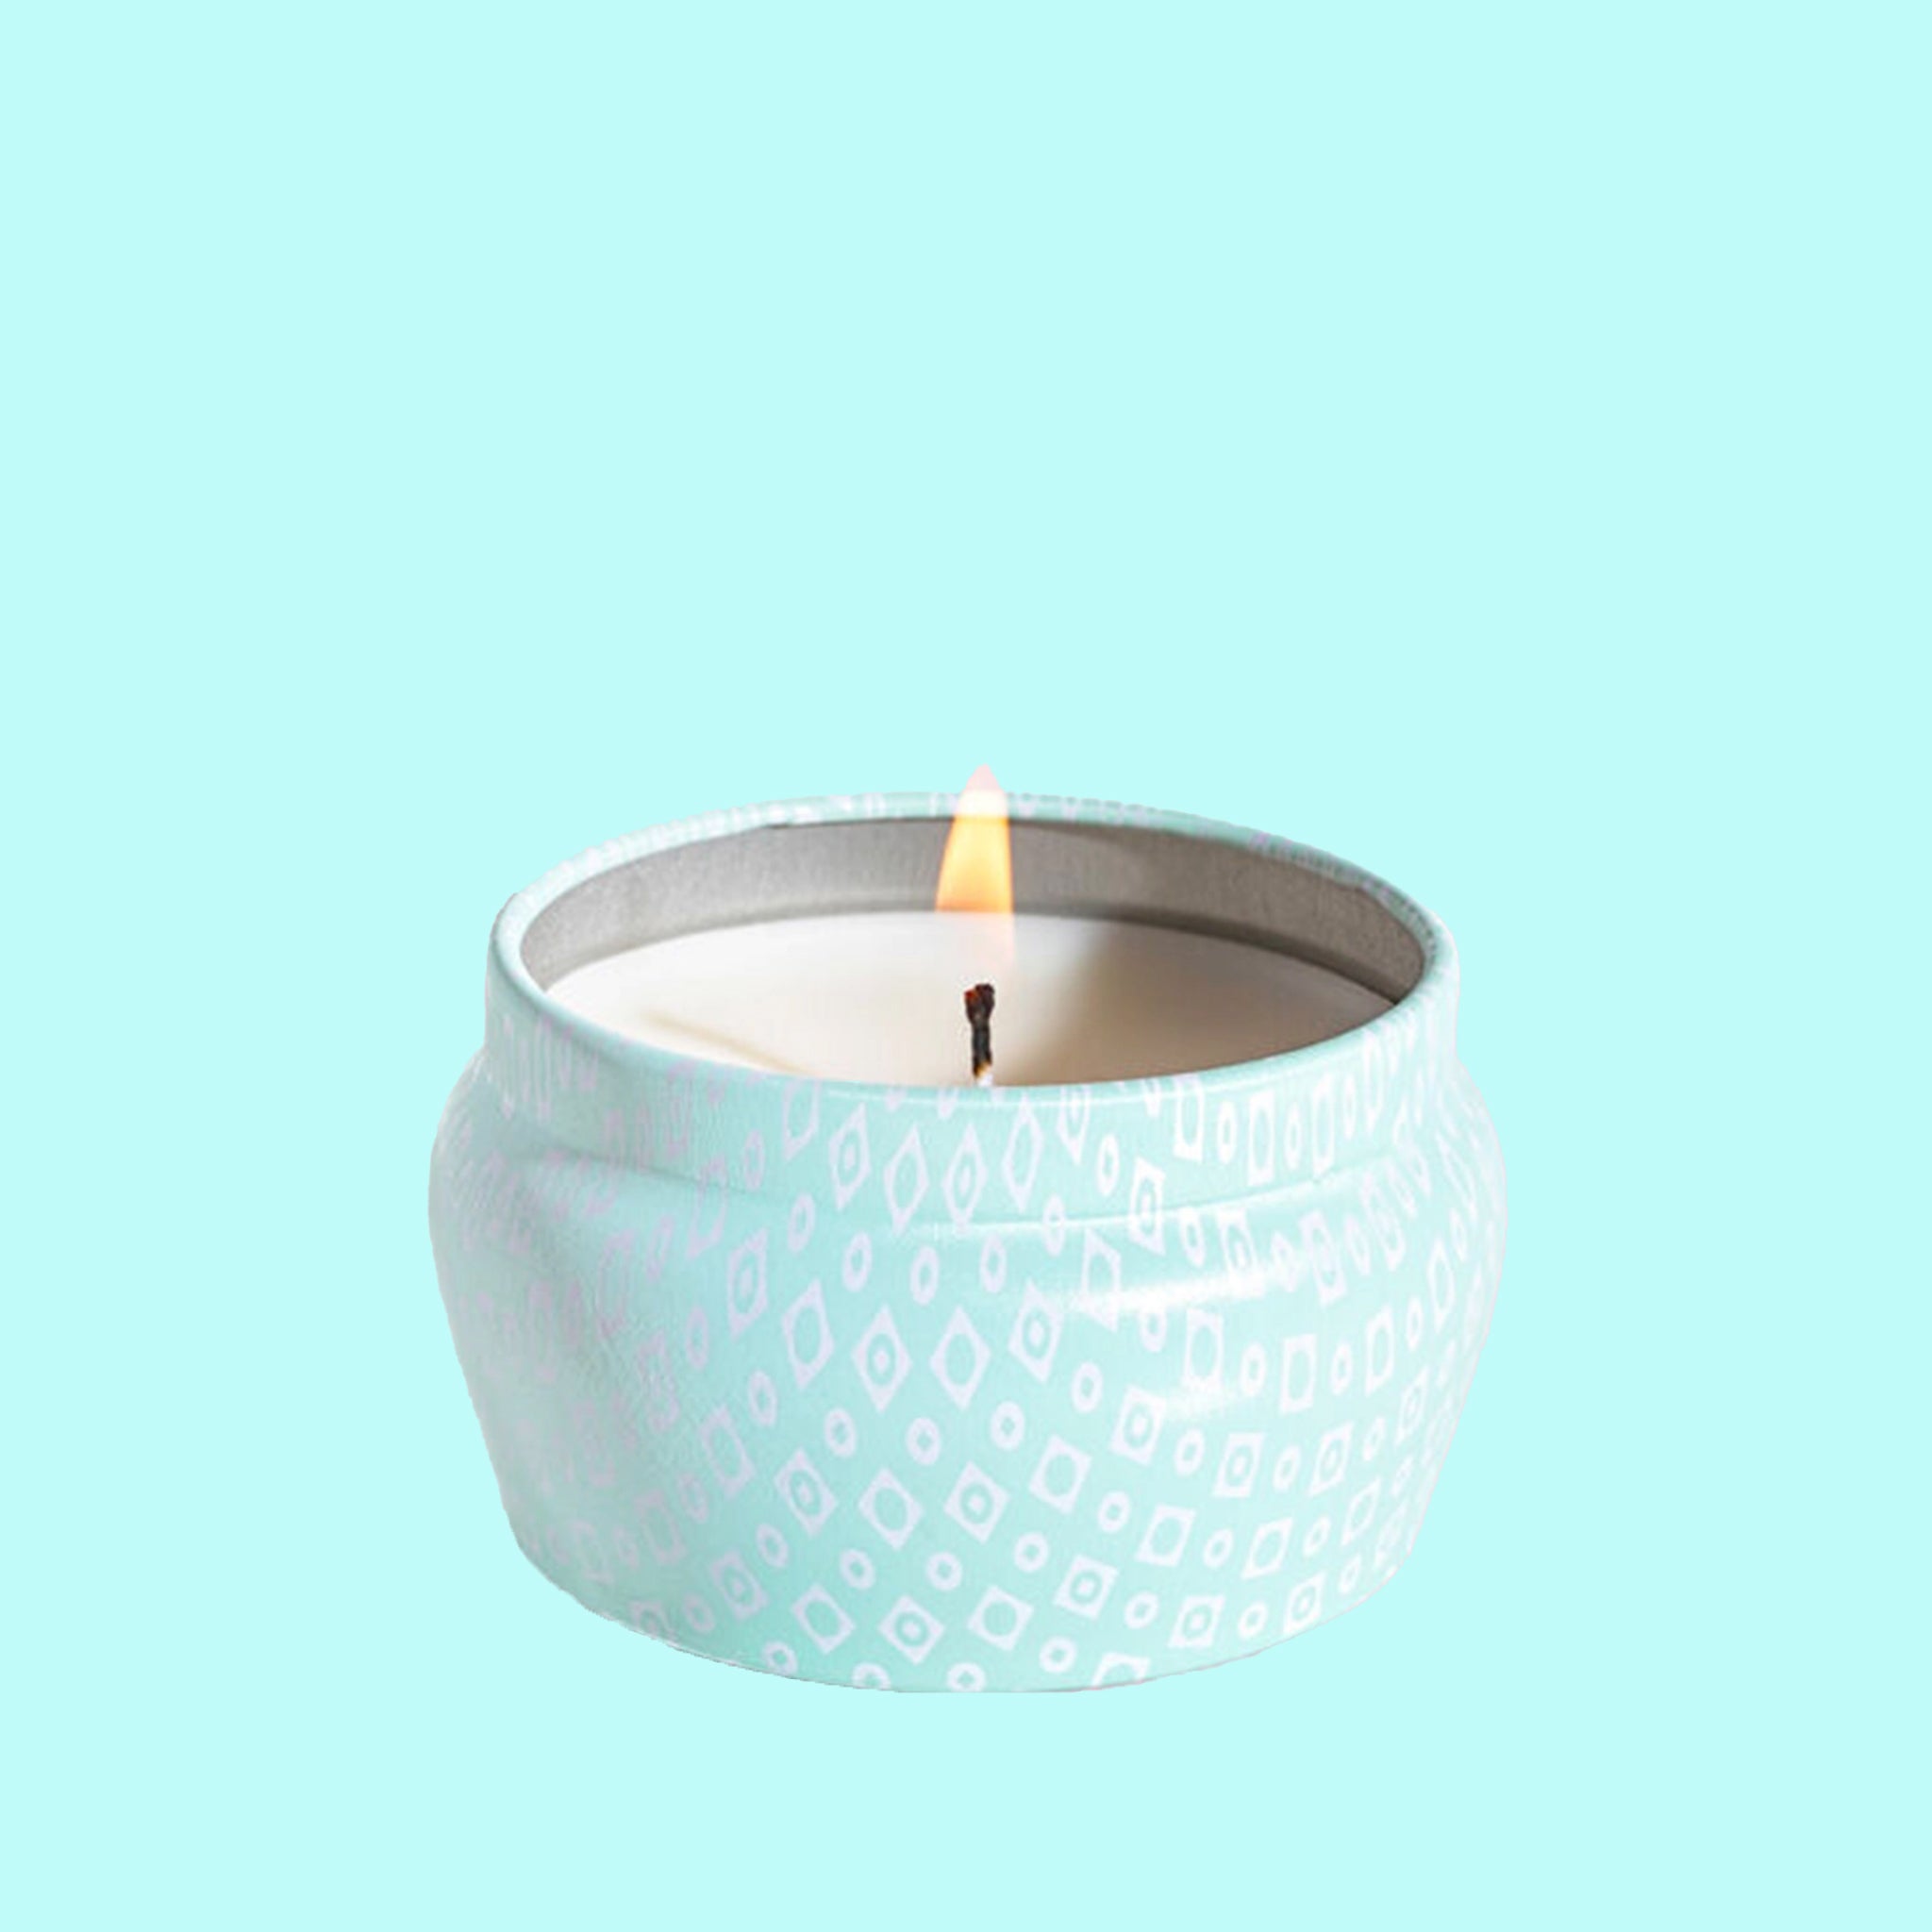 A small blue tin candle with white wax and a white diamond repeating pattern on the outside of the tin. Comes with a matching blue lid that reads, &quot;Capri Blue Volcano&quot;.